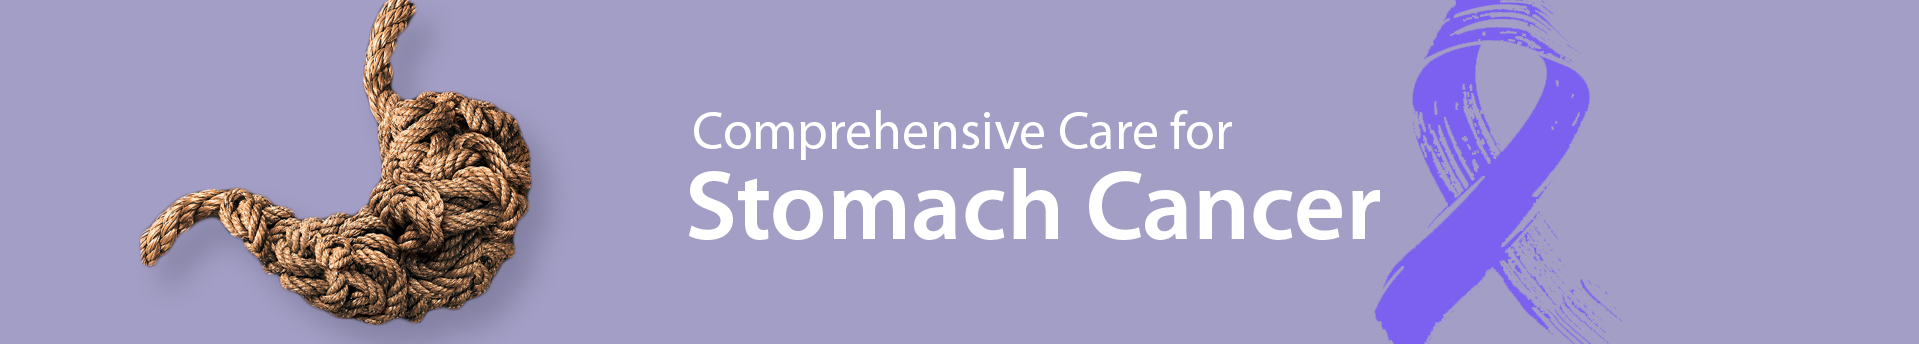 Medicaoncology Stomach Cancer